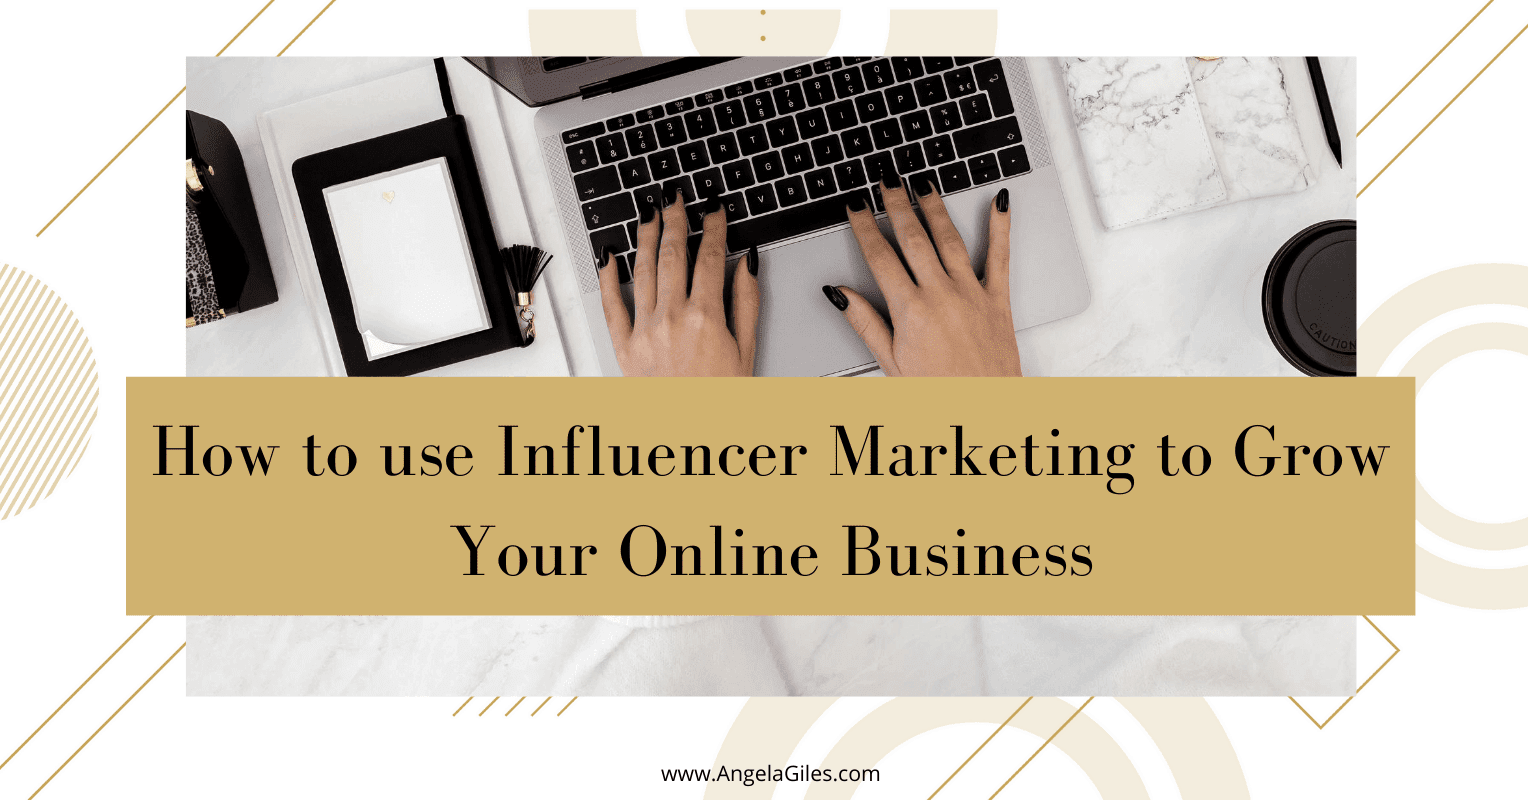 How To Use Influencer Marketing To Grow Your Online Business